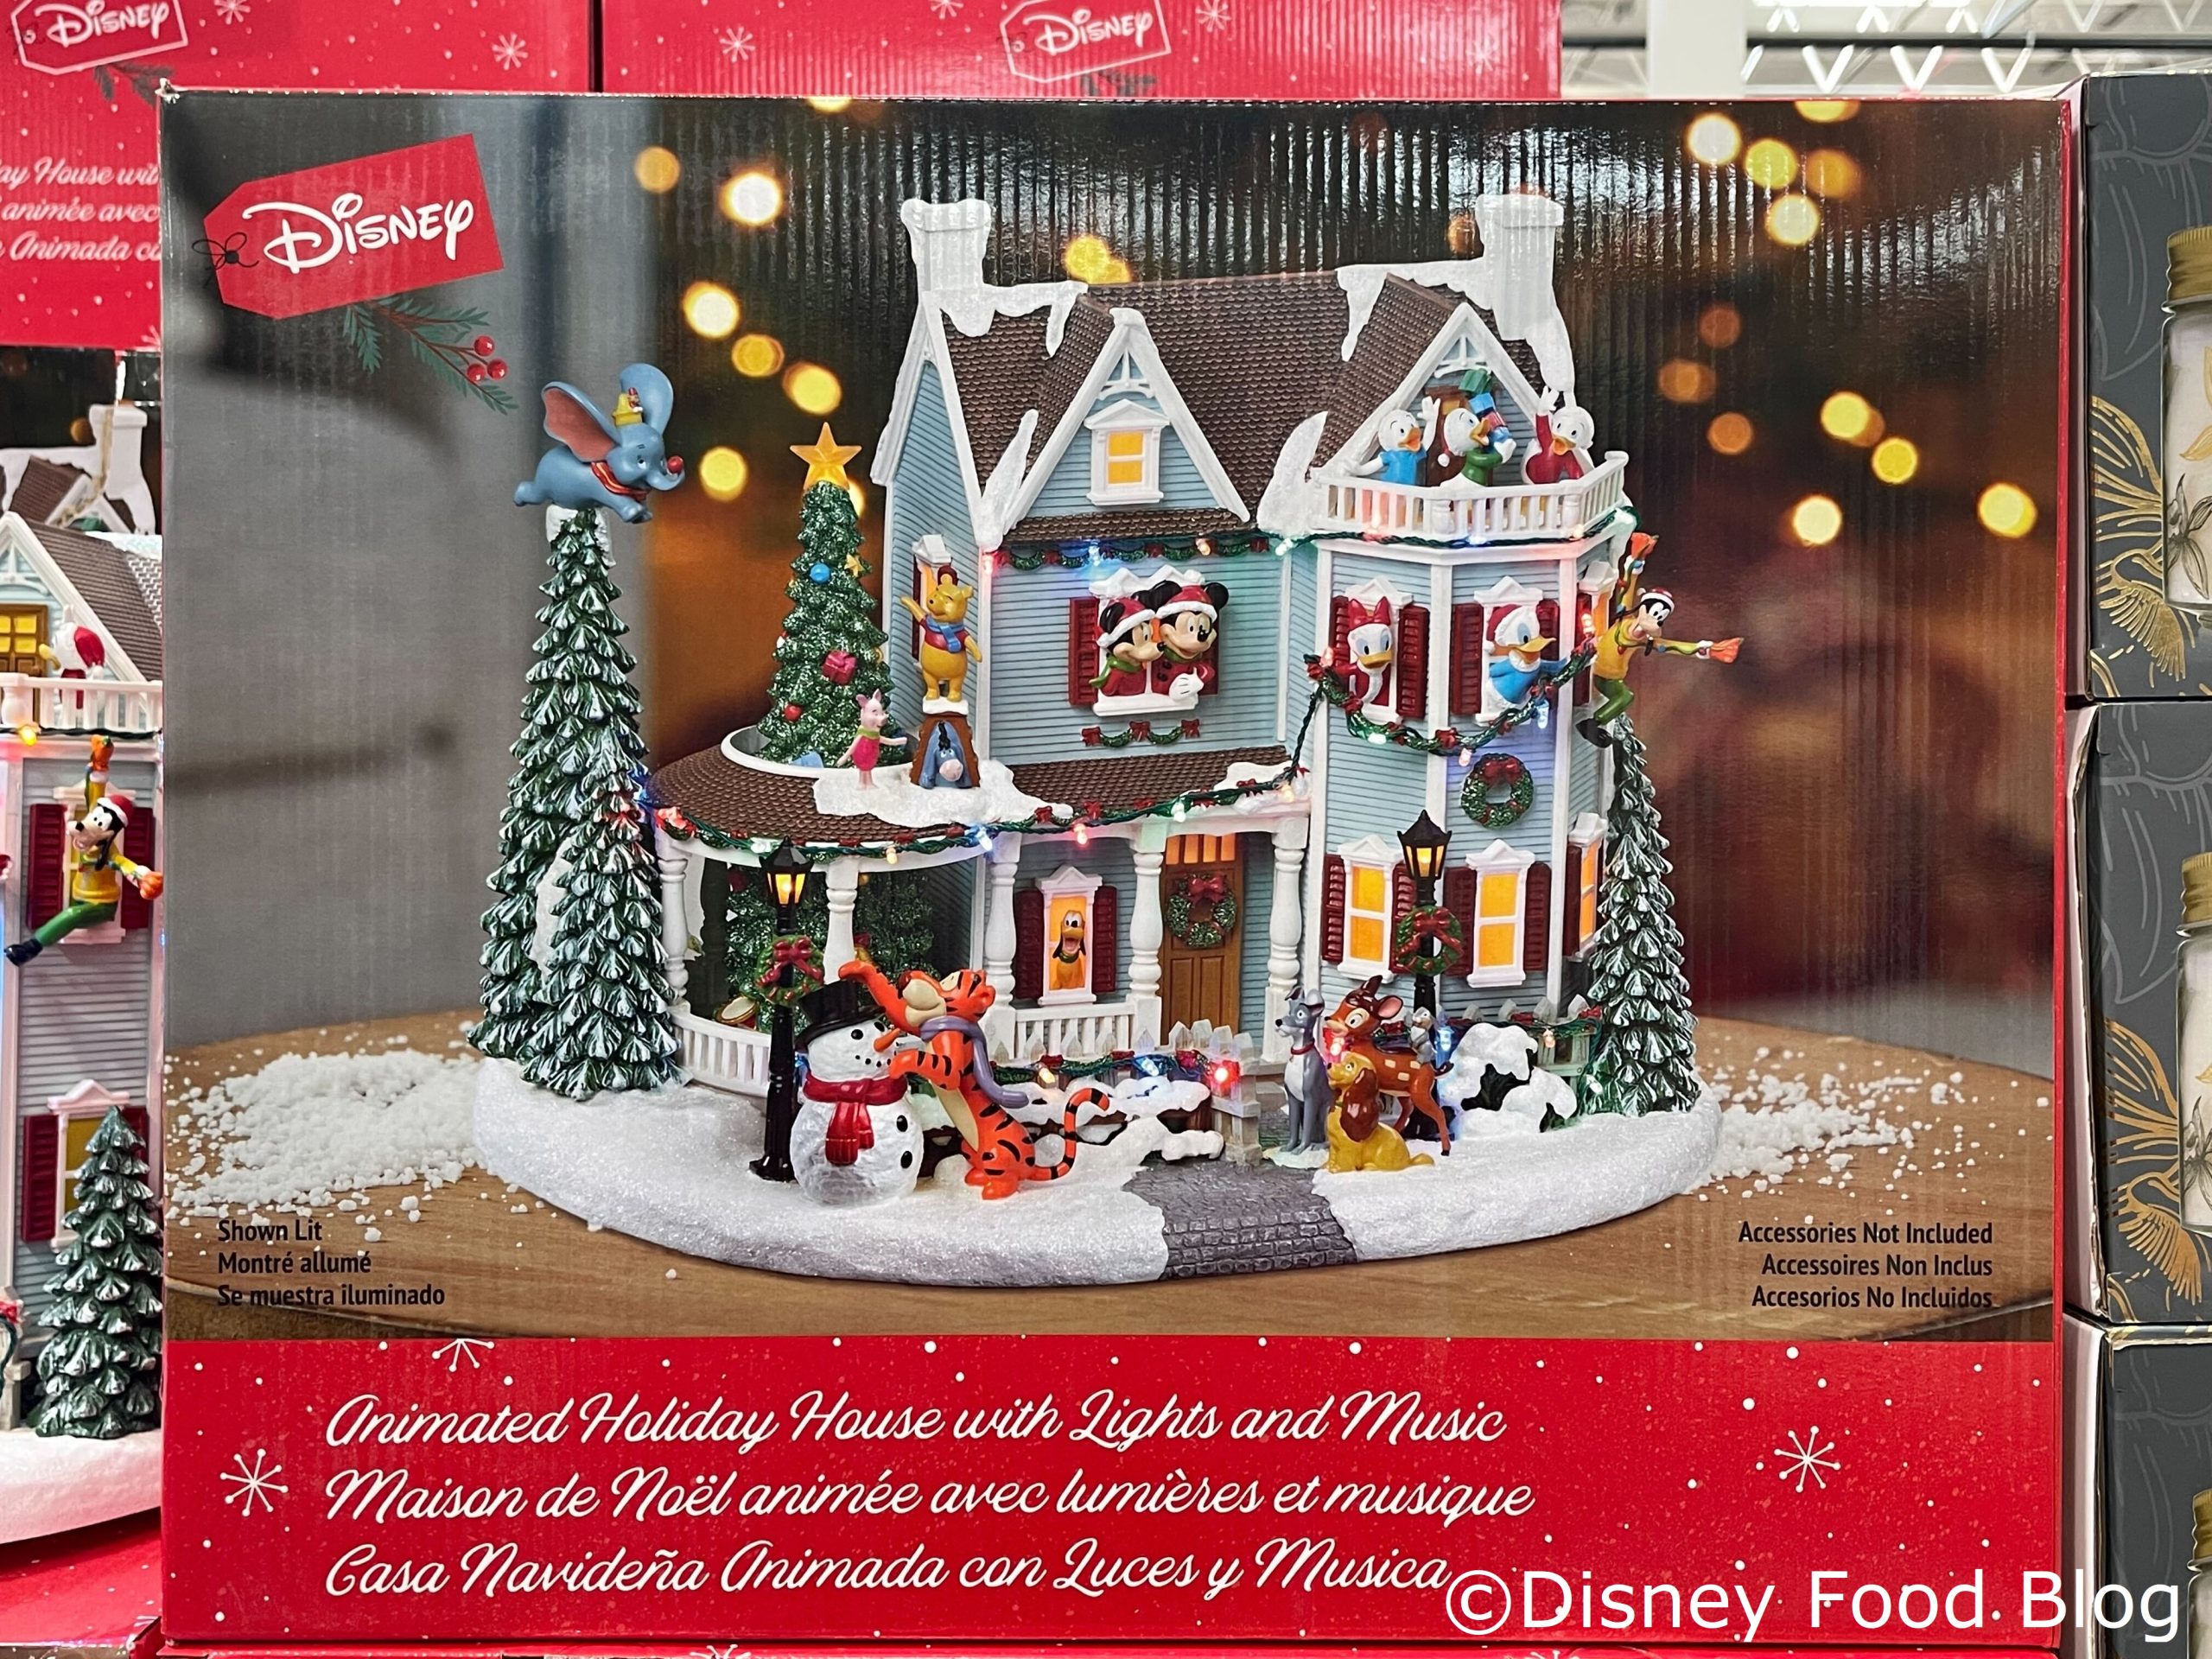 https://www.disneyfoodblog.com/wp-content/uploads/2022/10/animated-holiday-house-with-lights-and-music-costco-disney-christmas-decoration-1-scaled.jpg